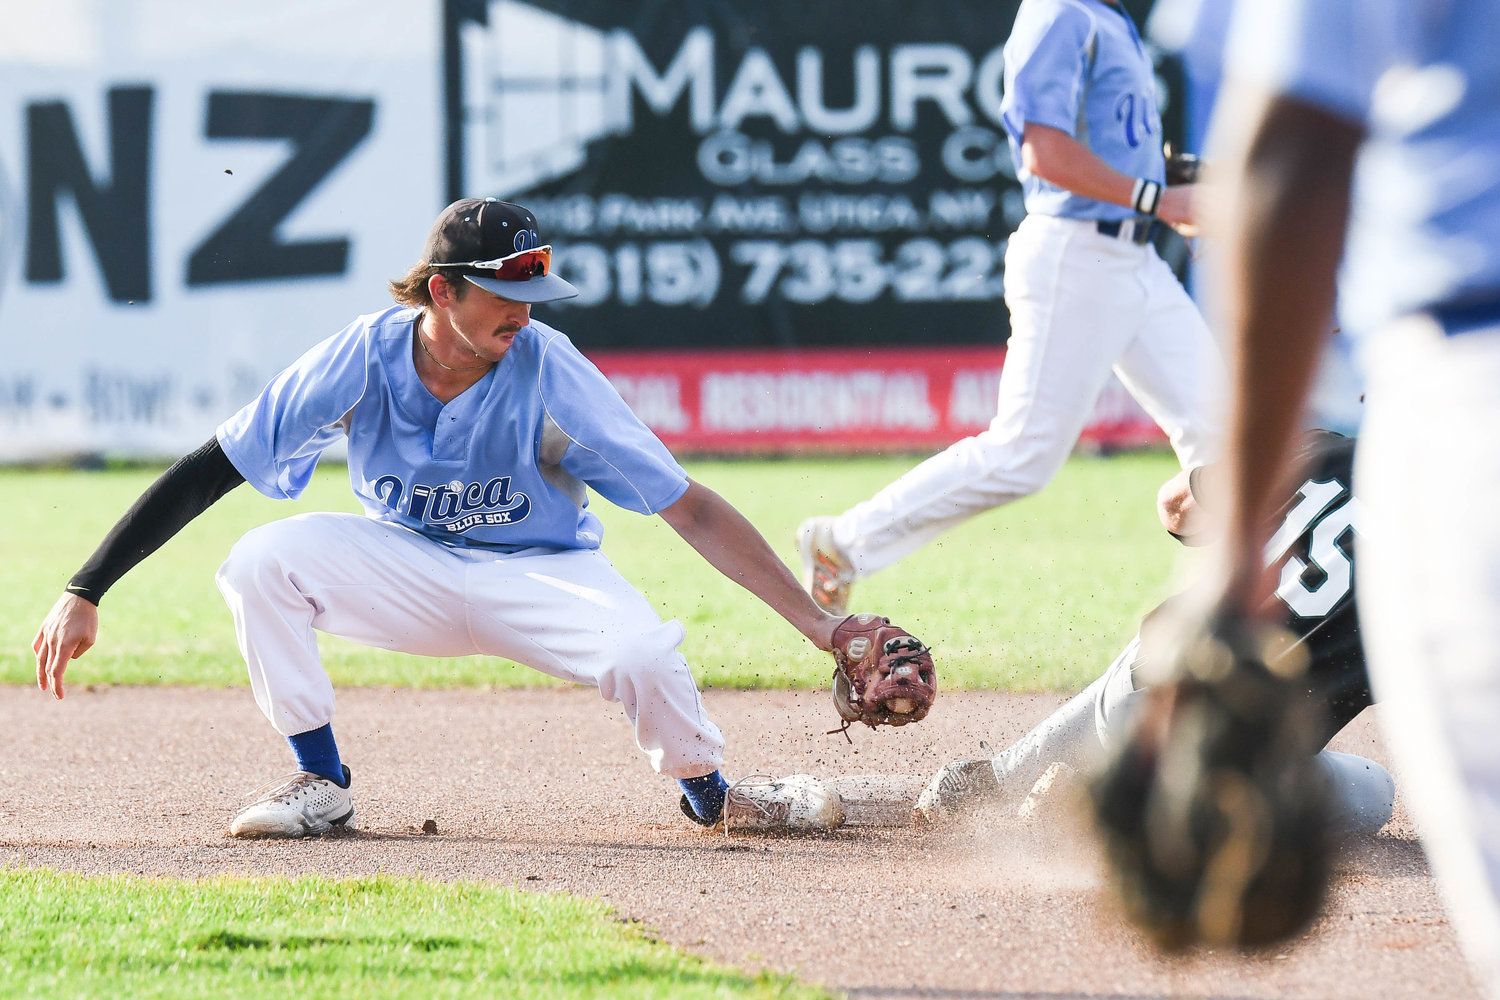 Utica Blue Sox player Troy Hamilton attempts to tag out Mohawk Valley DiamondDawgs base runner Pete Durocher during the game on Wednesday night at Donovan Stadium at Murnane Field in Utica.